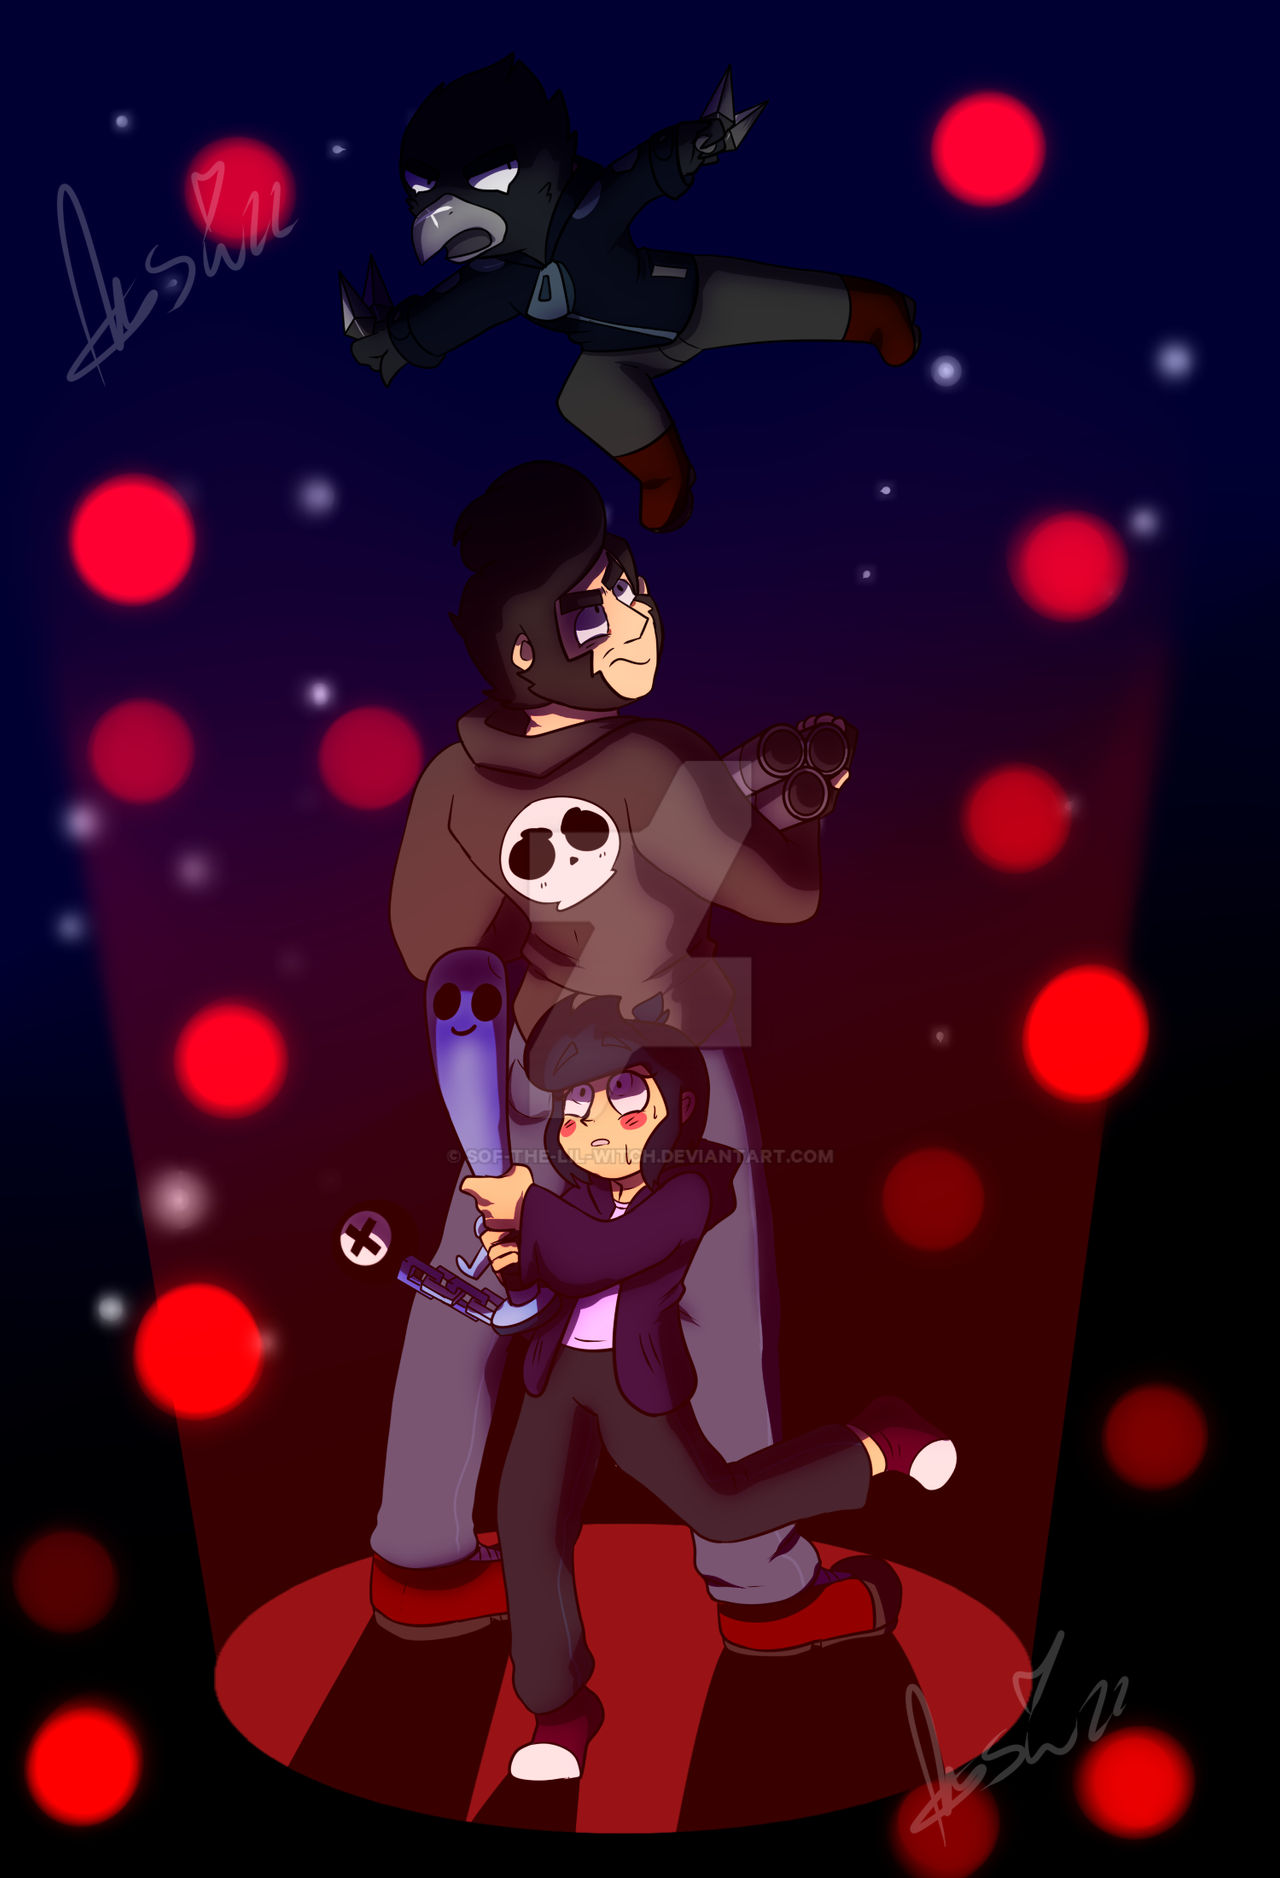 Bull S Past Brawl Stars Part 4 By Sof The Lil Witch On Deviantart - old brawl stars crow